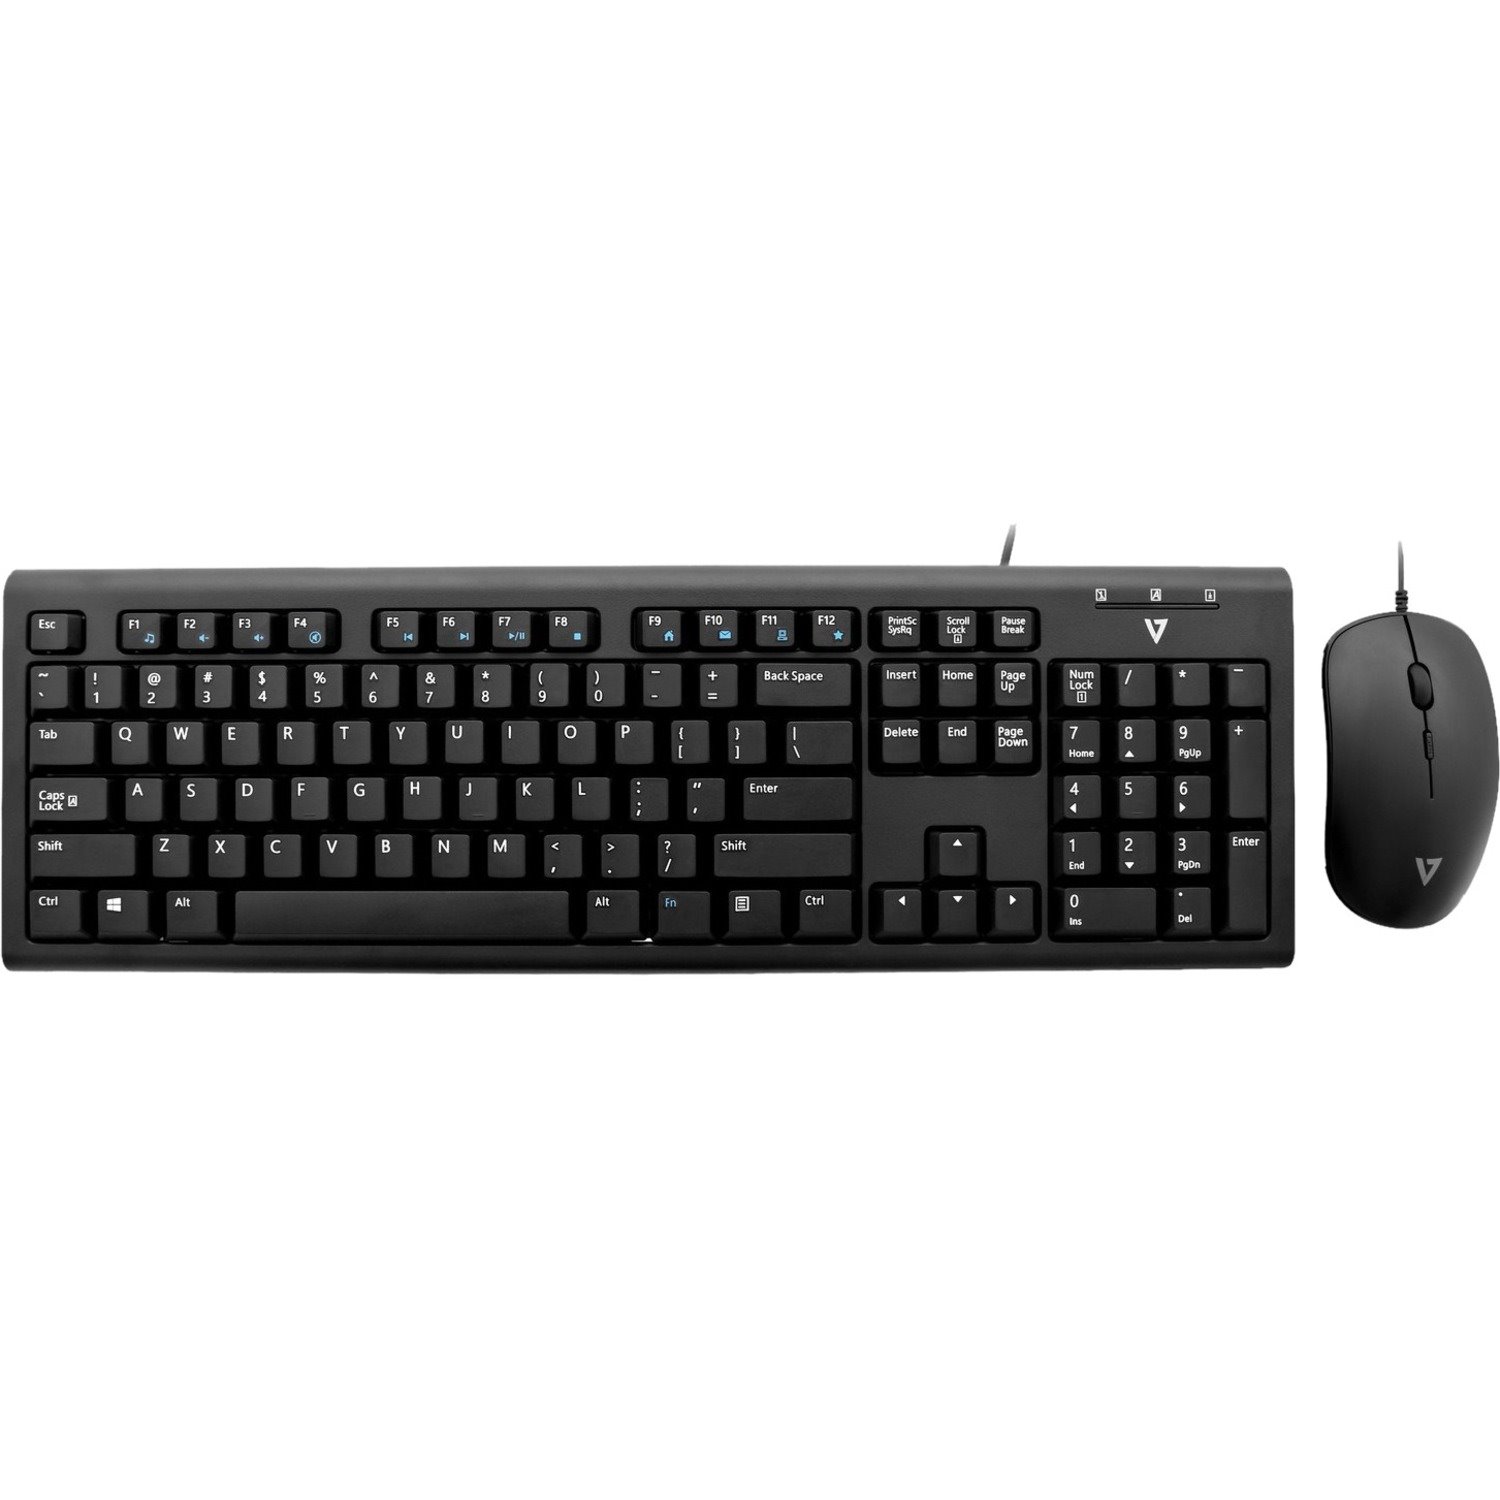 V7 Wired Keyboard and Mouse Combo